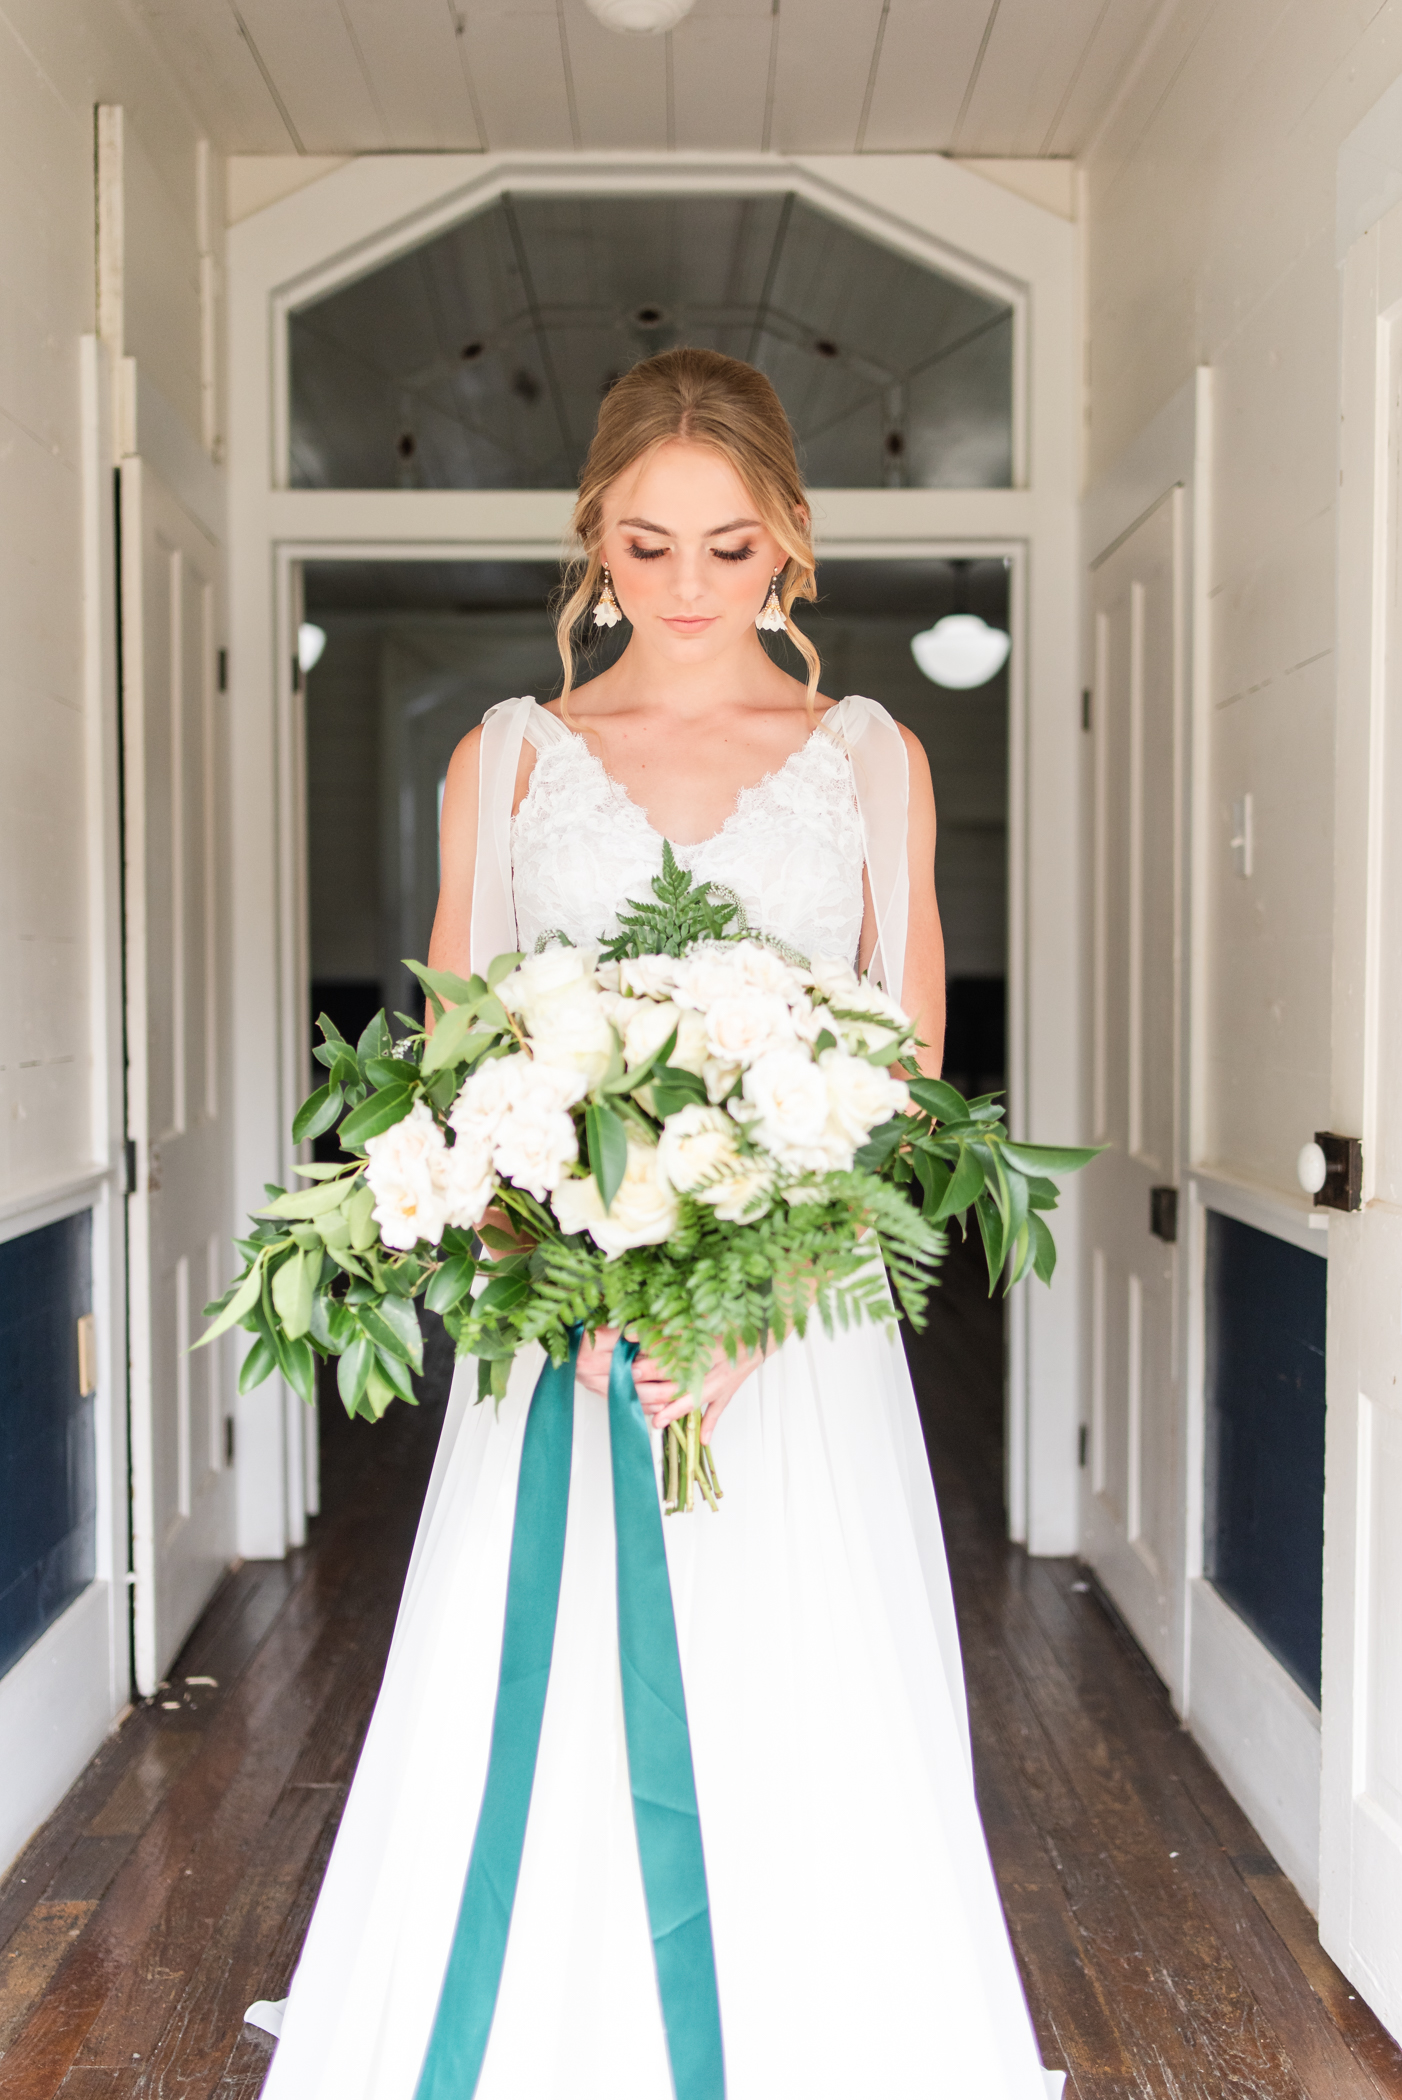 Bridal Portrait with a white and green bridal bouquet at the chapel door of the Inn at Salado.